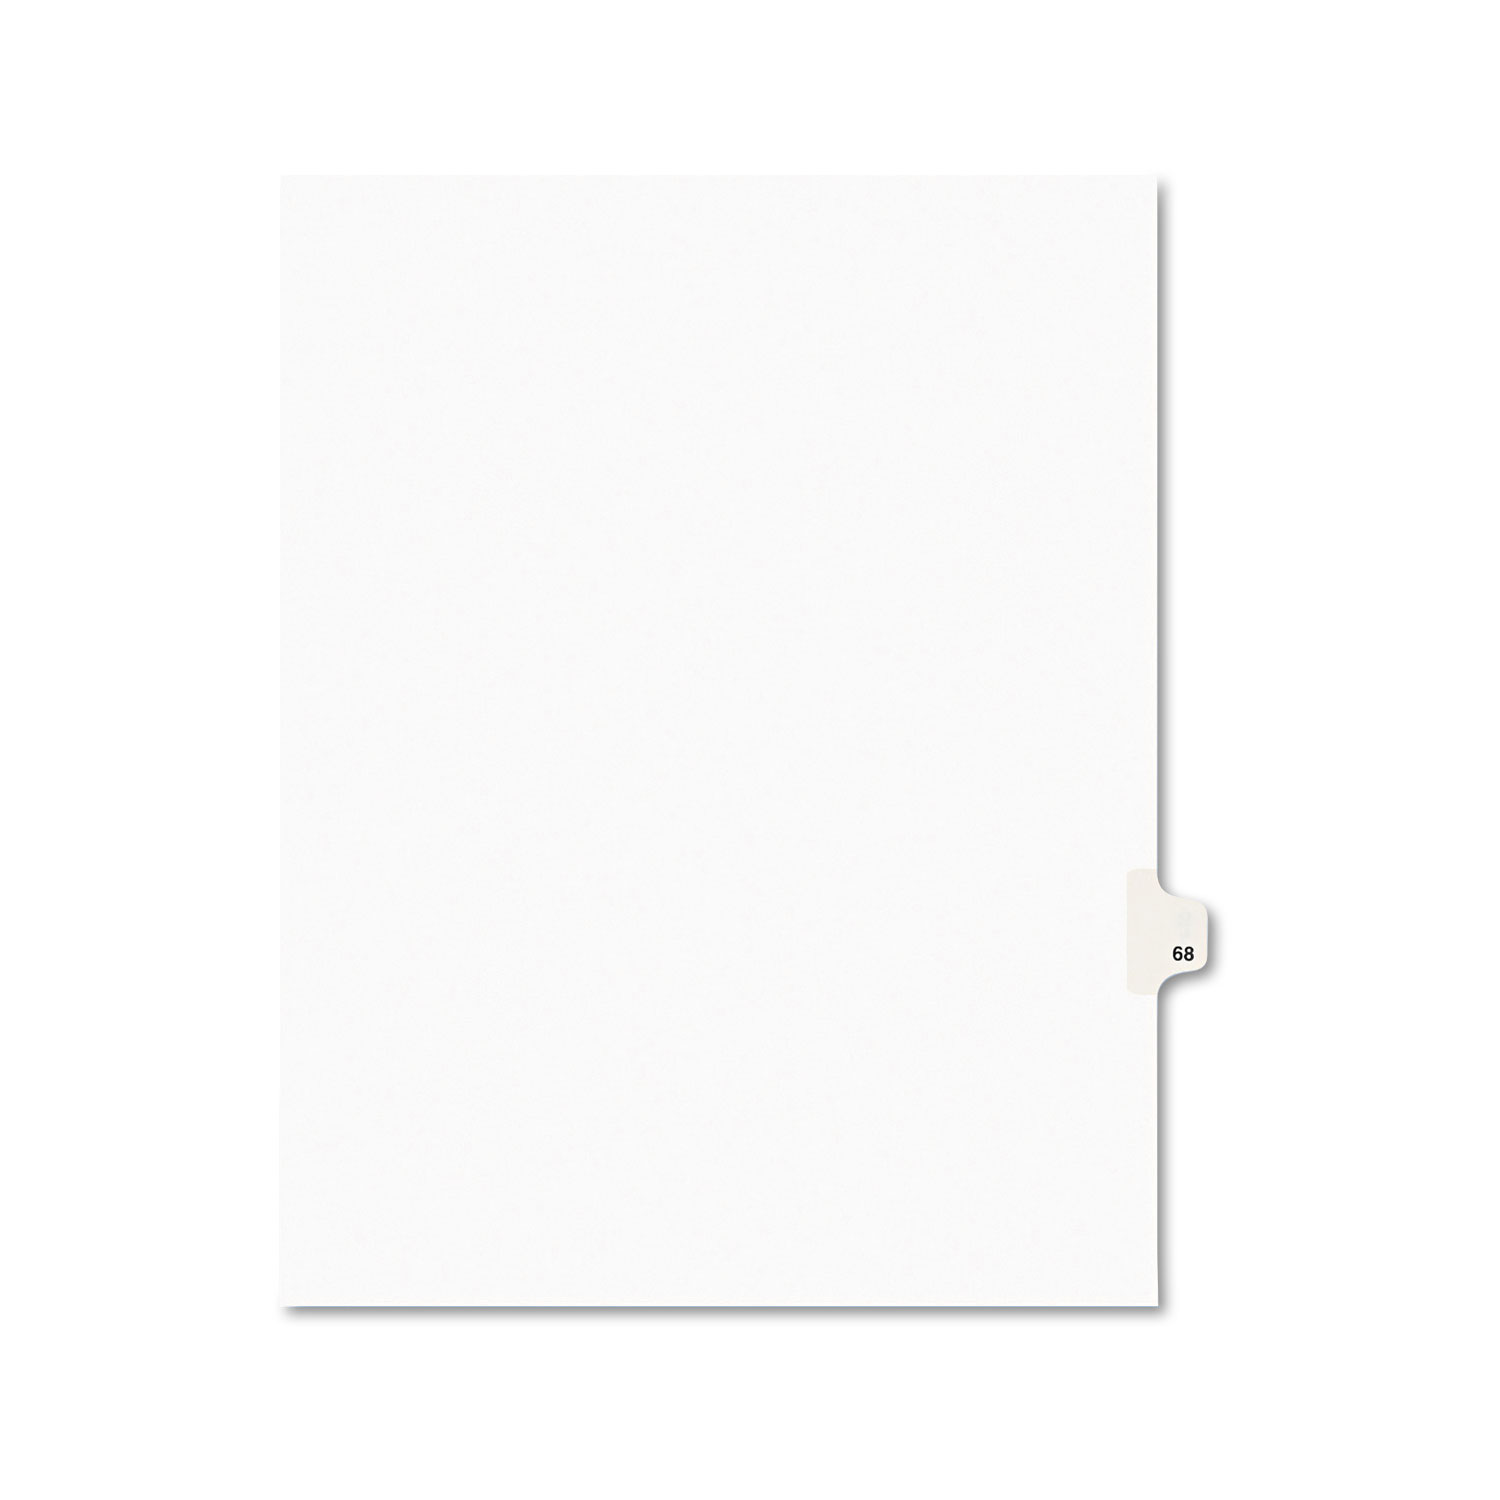  Avery 01068 Preprinted Legal Exhibit Side Tab Index Dividers, Avery Style, 10-Tab, 68, 11 x 8.5, White, 25/Pack (AVE01068) 